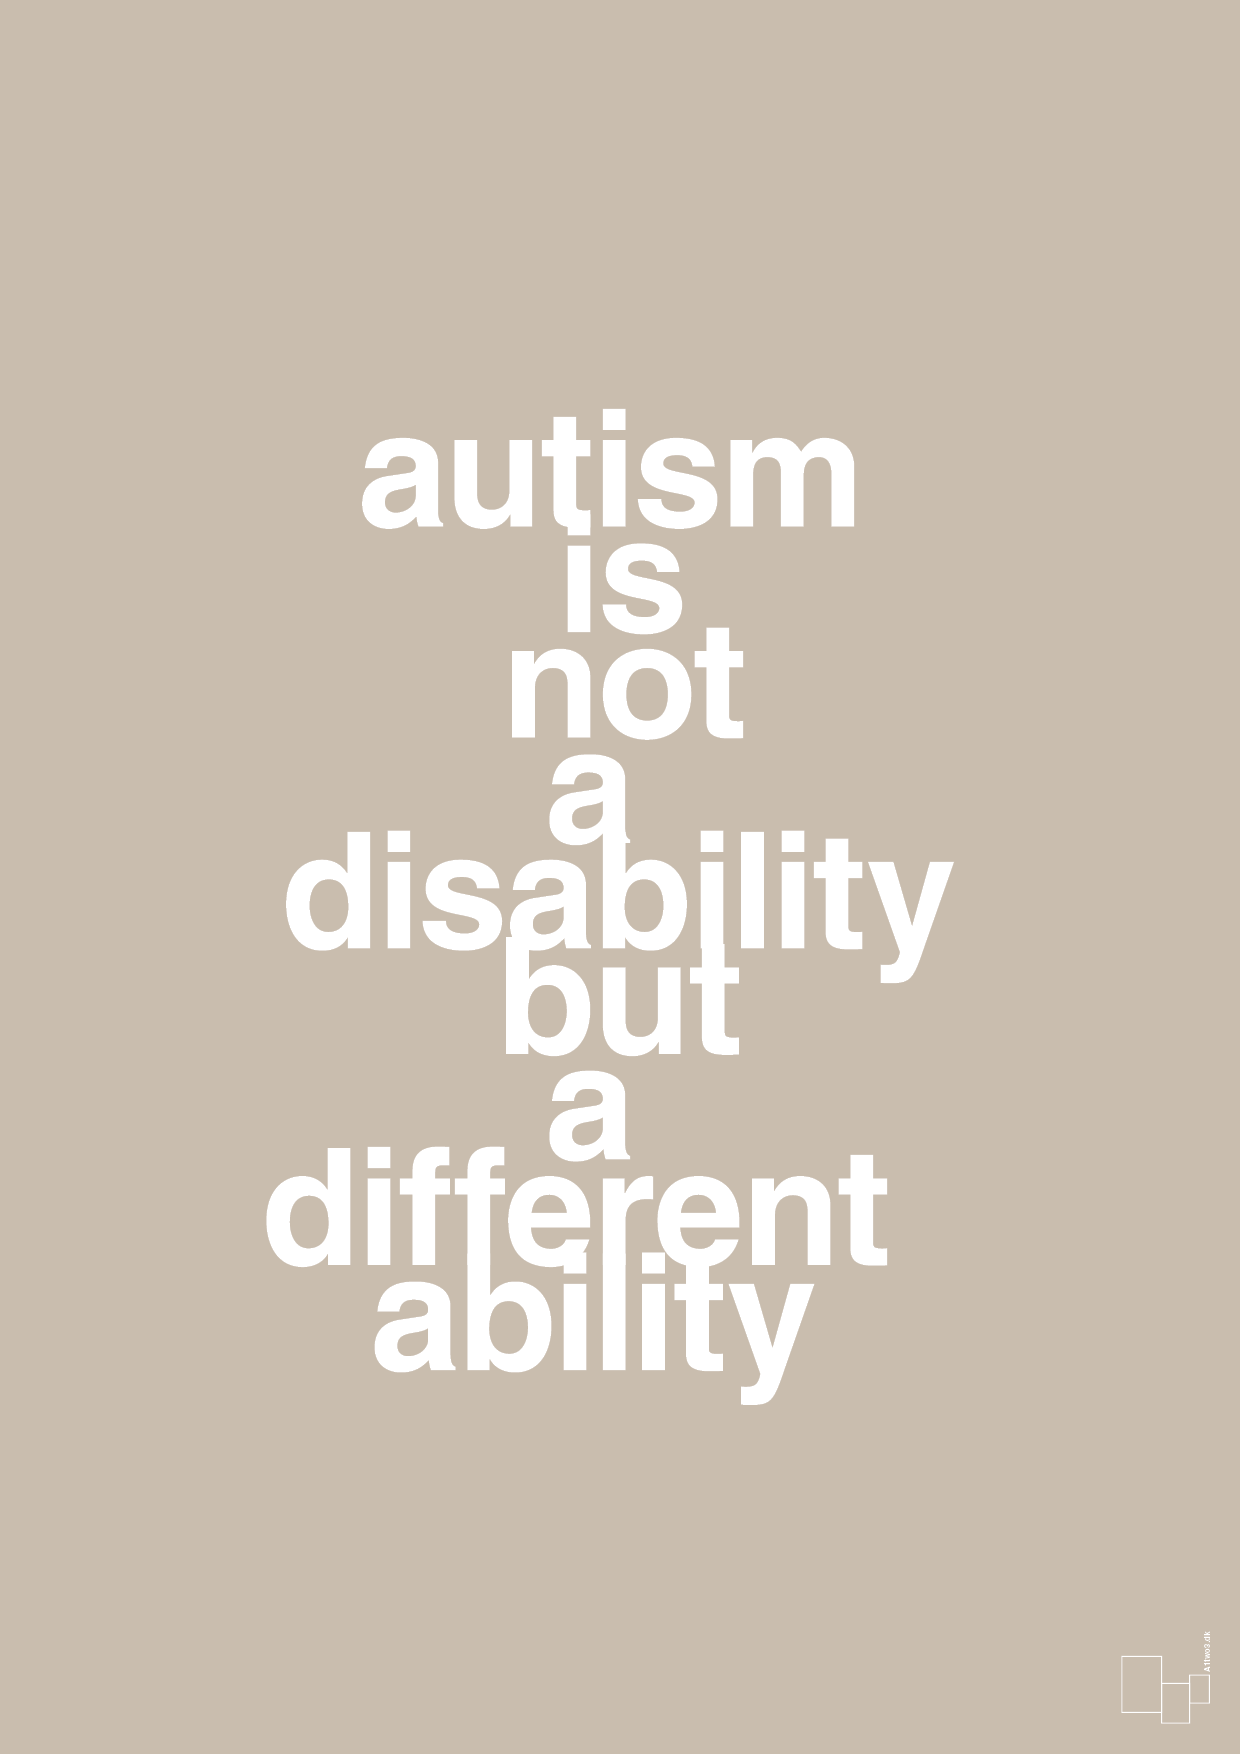 autism is not a disability but a different ability - Plakat med Samfund i Creamy Mushroom